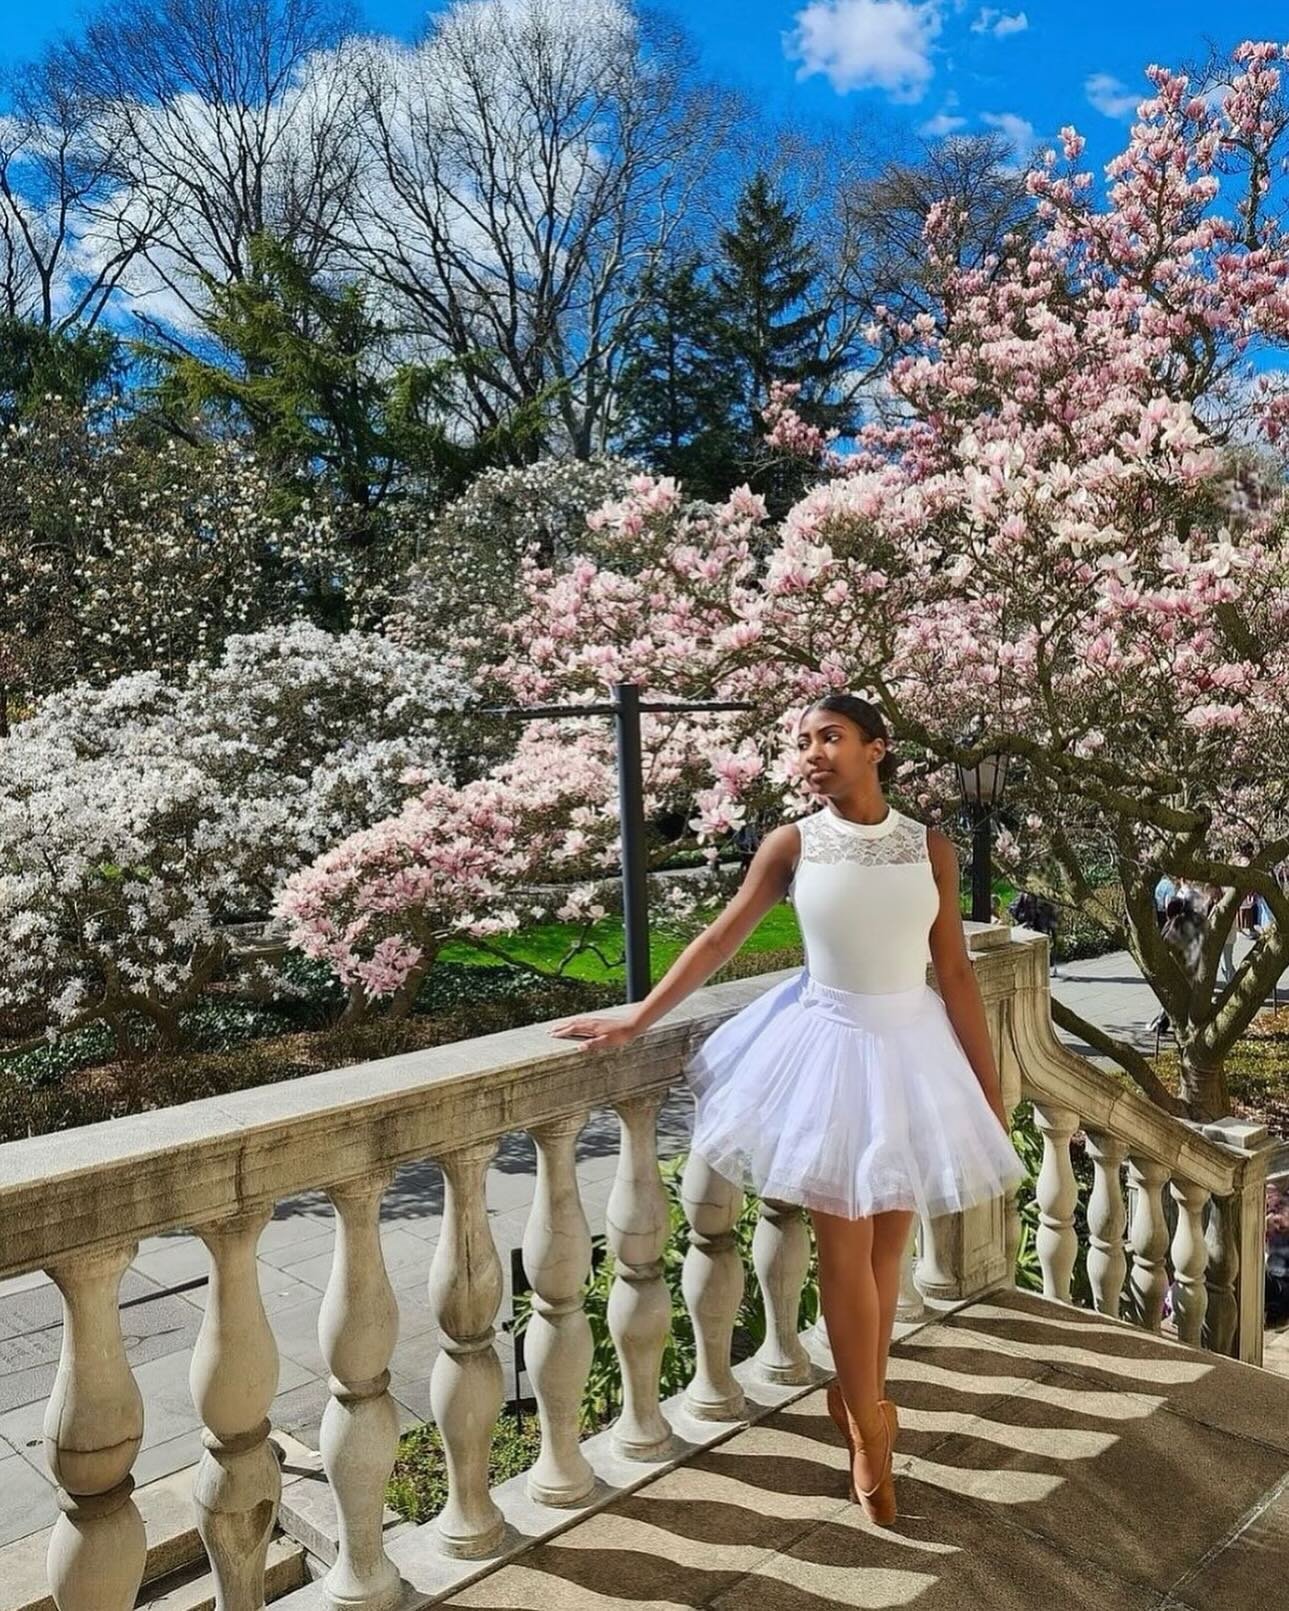 Happy Tutu Tuesday! 💕🩰

Tag us in your tutu pictures with the hashtag #bgdbtututuesday to be featured!

🩰: @ali.the.curly.ballerina 

Image Description: Dancer stands at the top of a stone staircase outside. There are several blooming trees behind